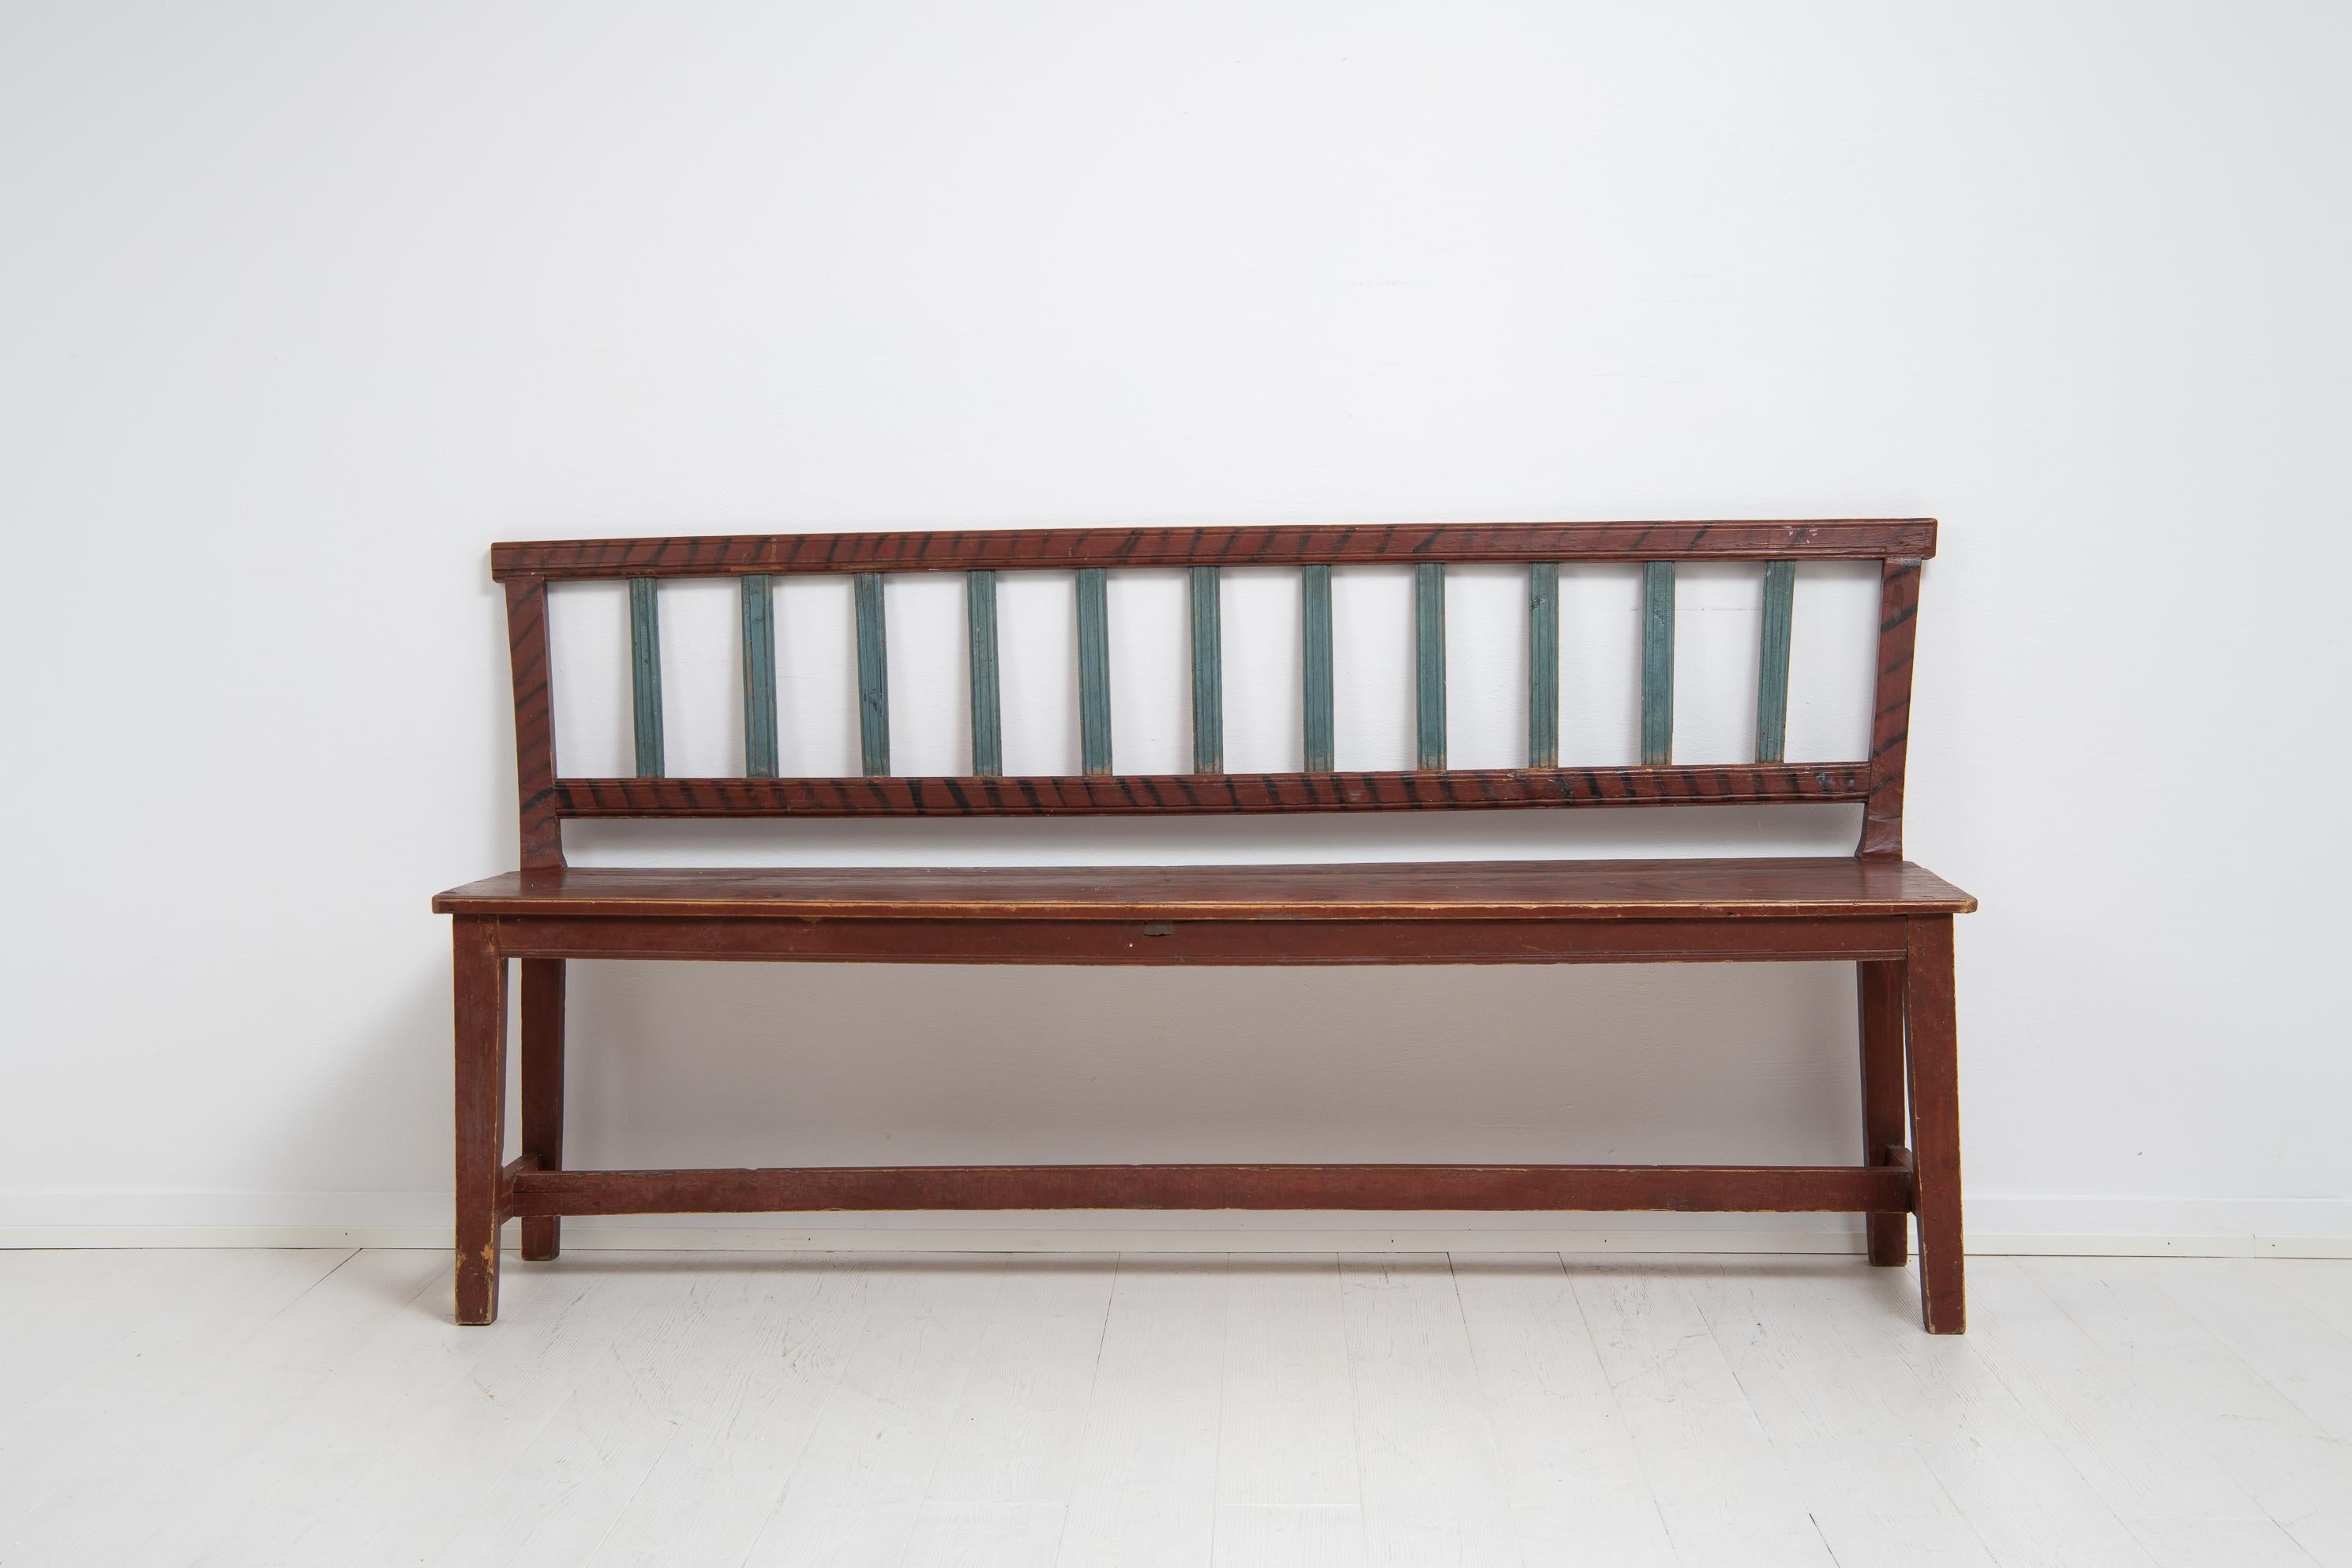 Hand-Crafted Early 19th Century Swedish Gustavian Folk Art Country Sofa or Bench For Sale